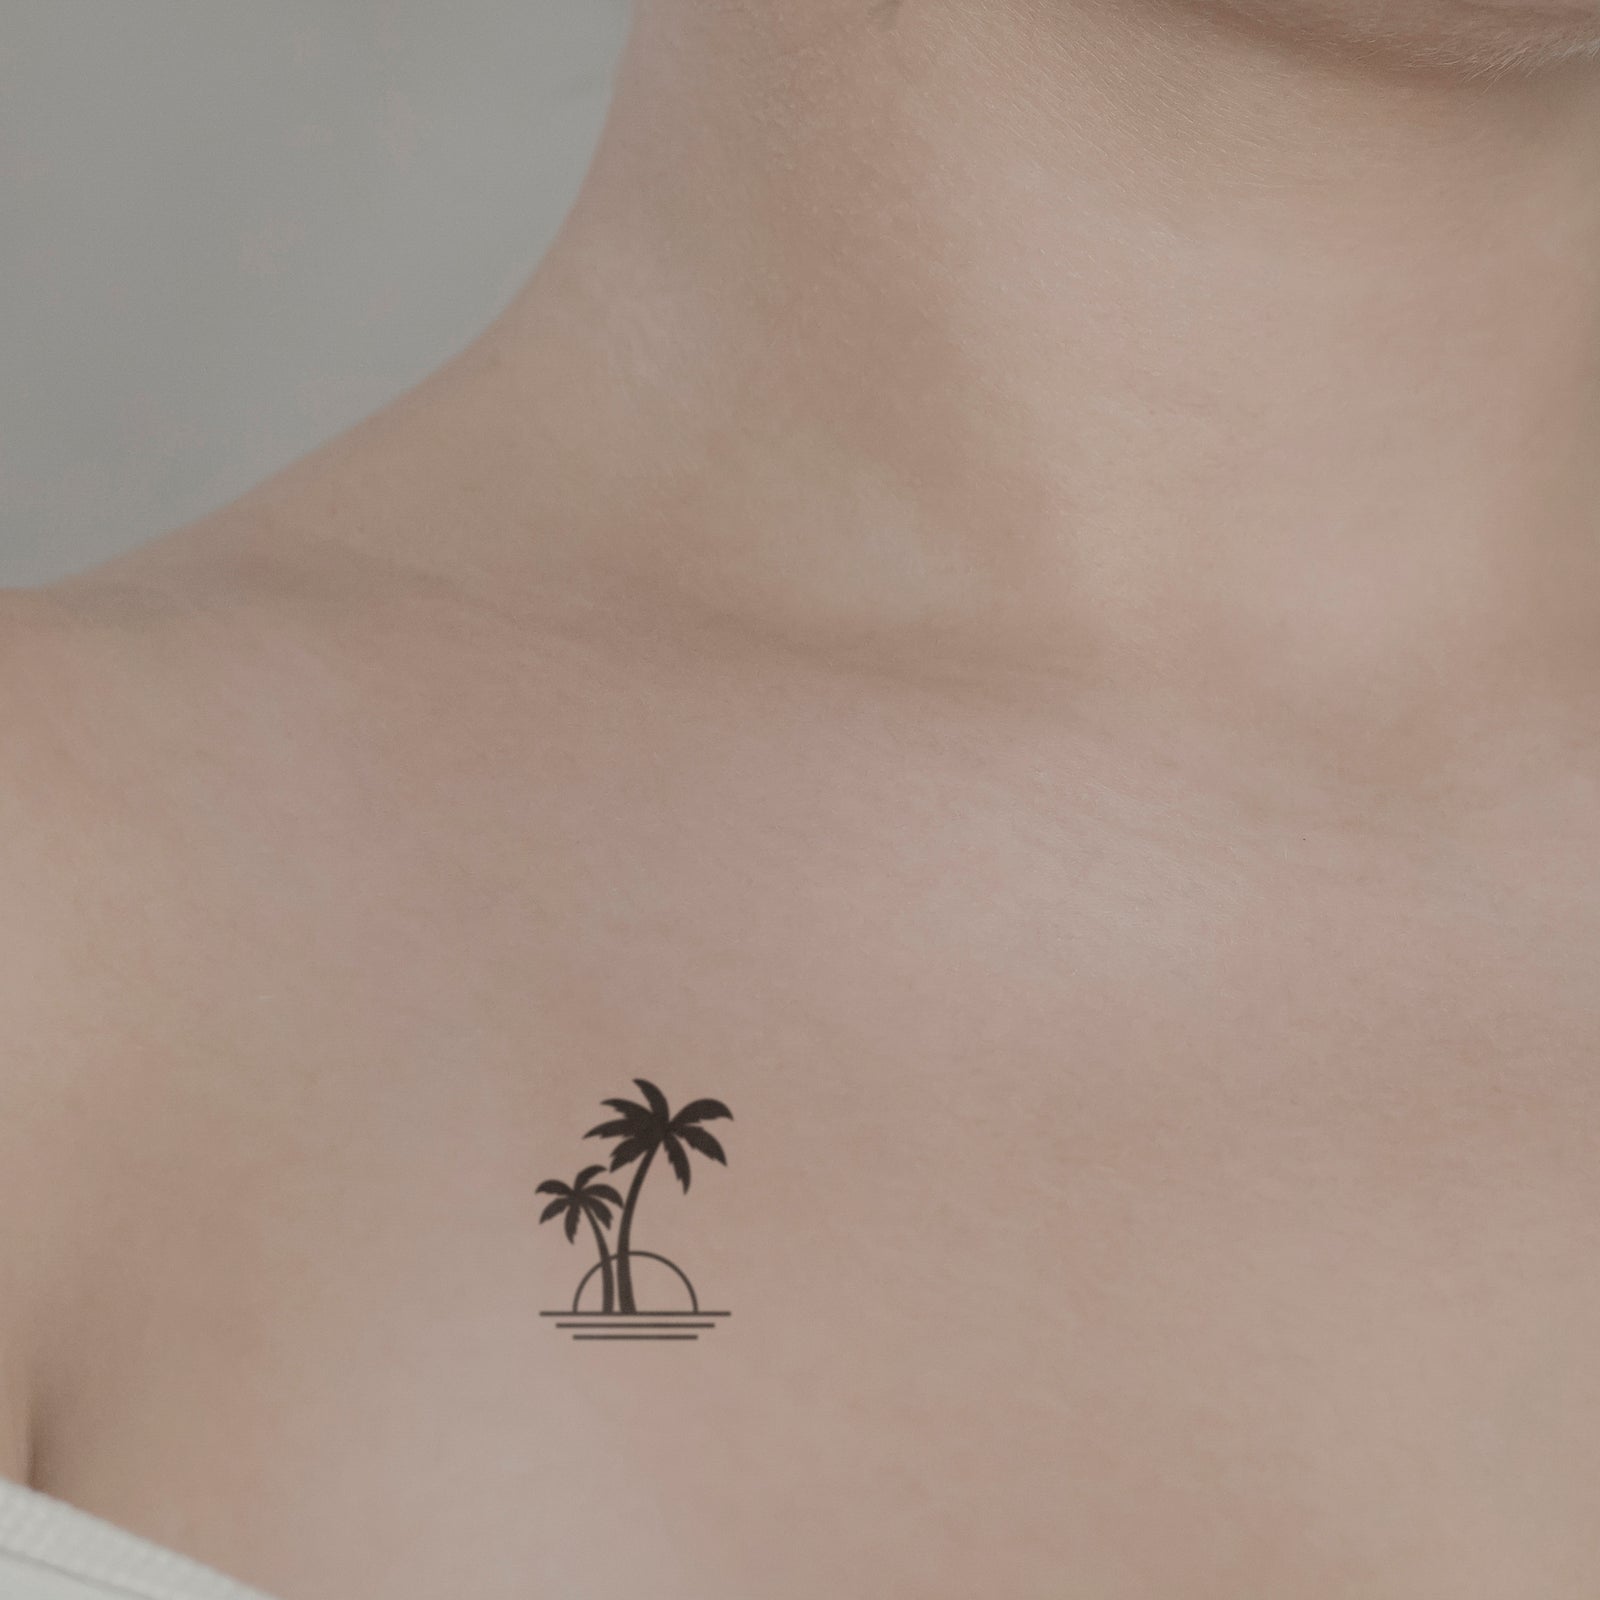 Diamonds are forever but are palm tattoos? - BME: Tattoo, Piercing and Body  Modification NewsBME: Tattoo, Piercing and Body Modification News